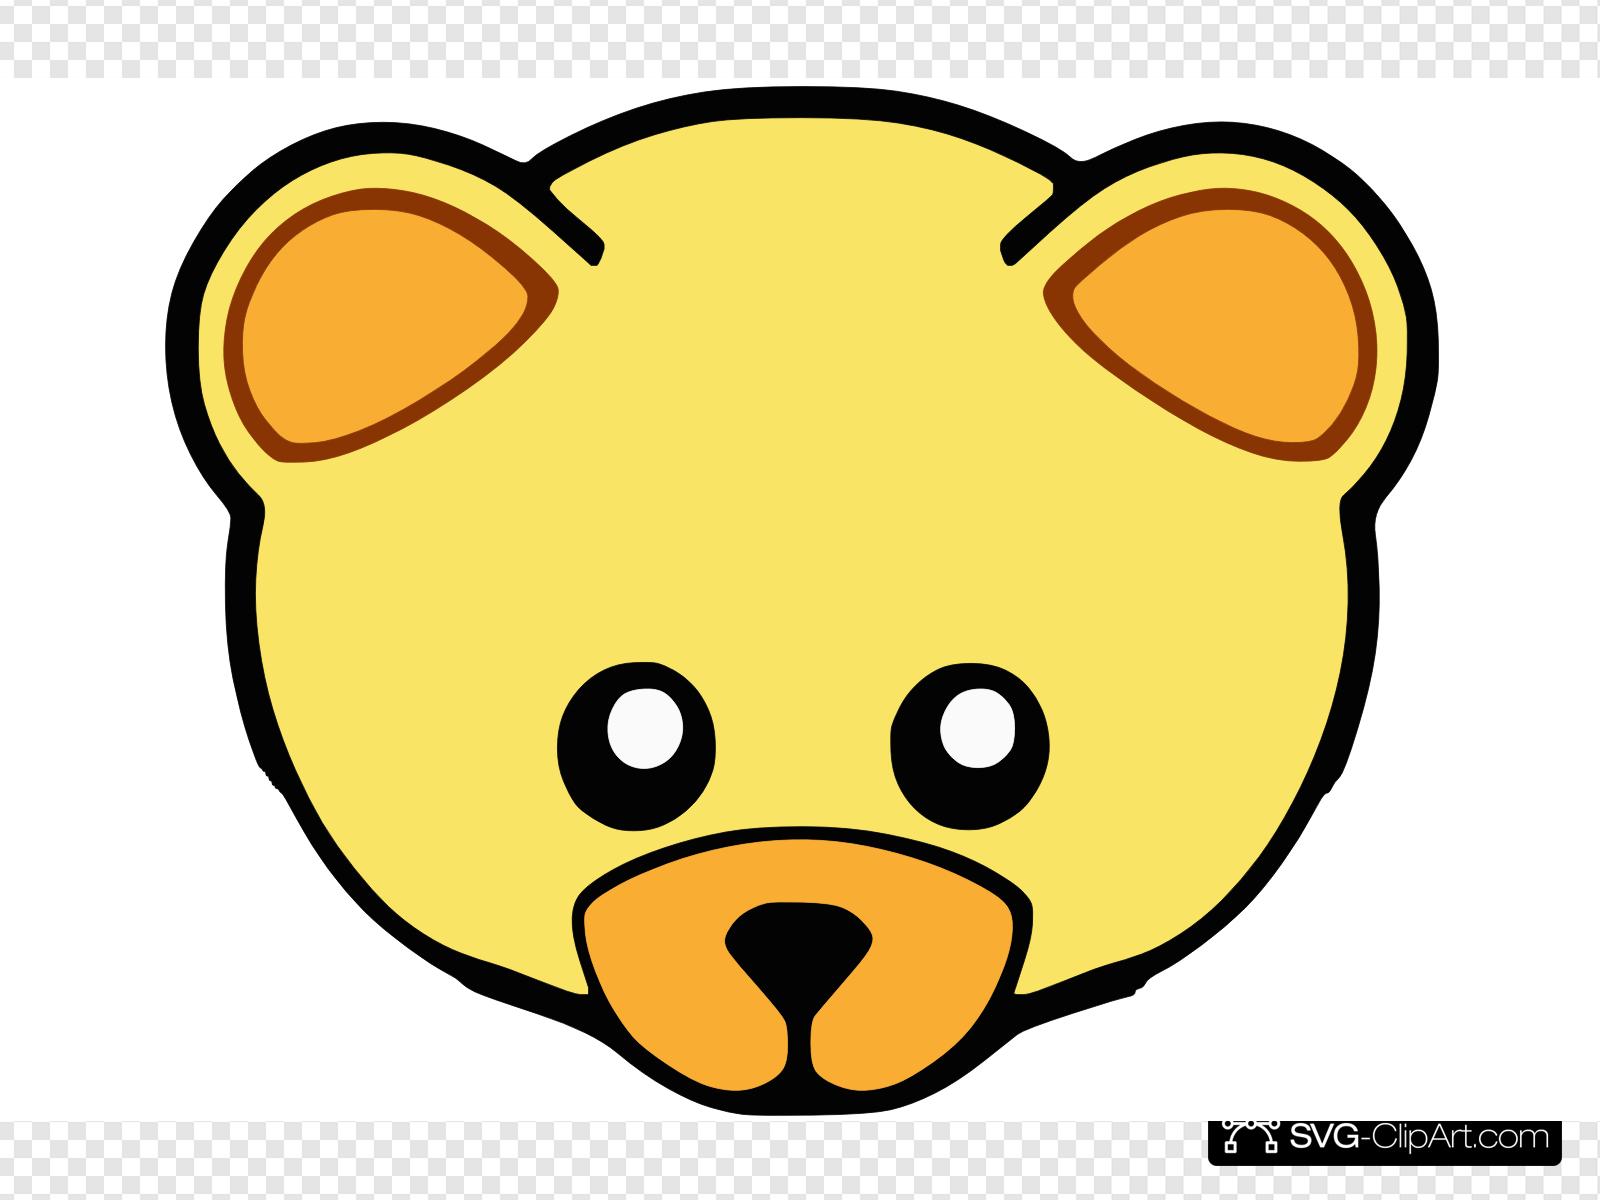 Yellow Cute Teddy Bear Face Clip art, Icon and SVG.